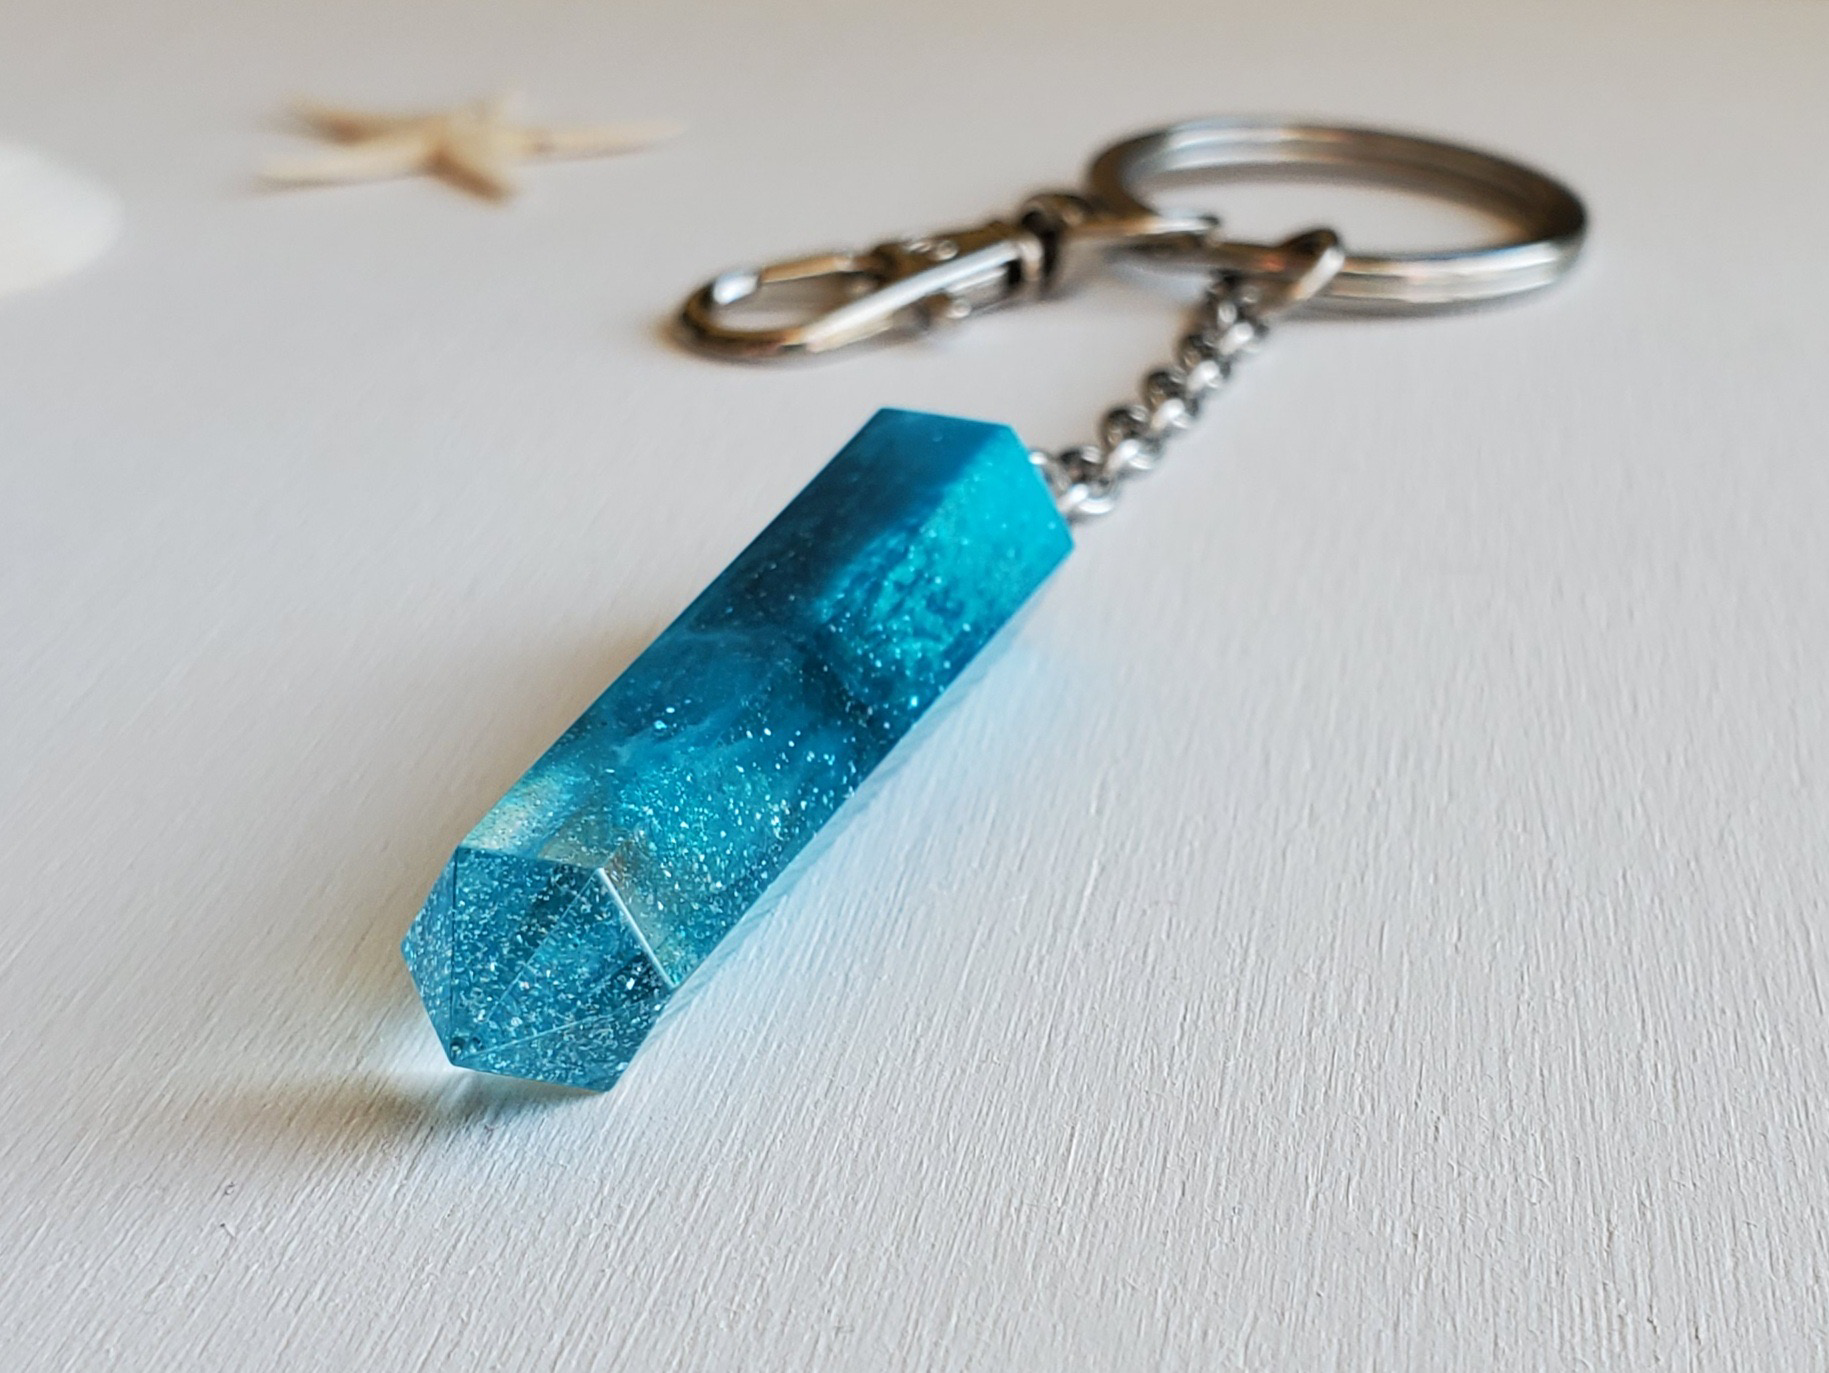 Infused Moments Artistry Resin Keychain - Round Gold & Turquoise